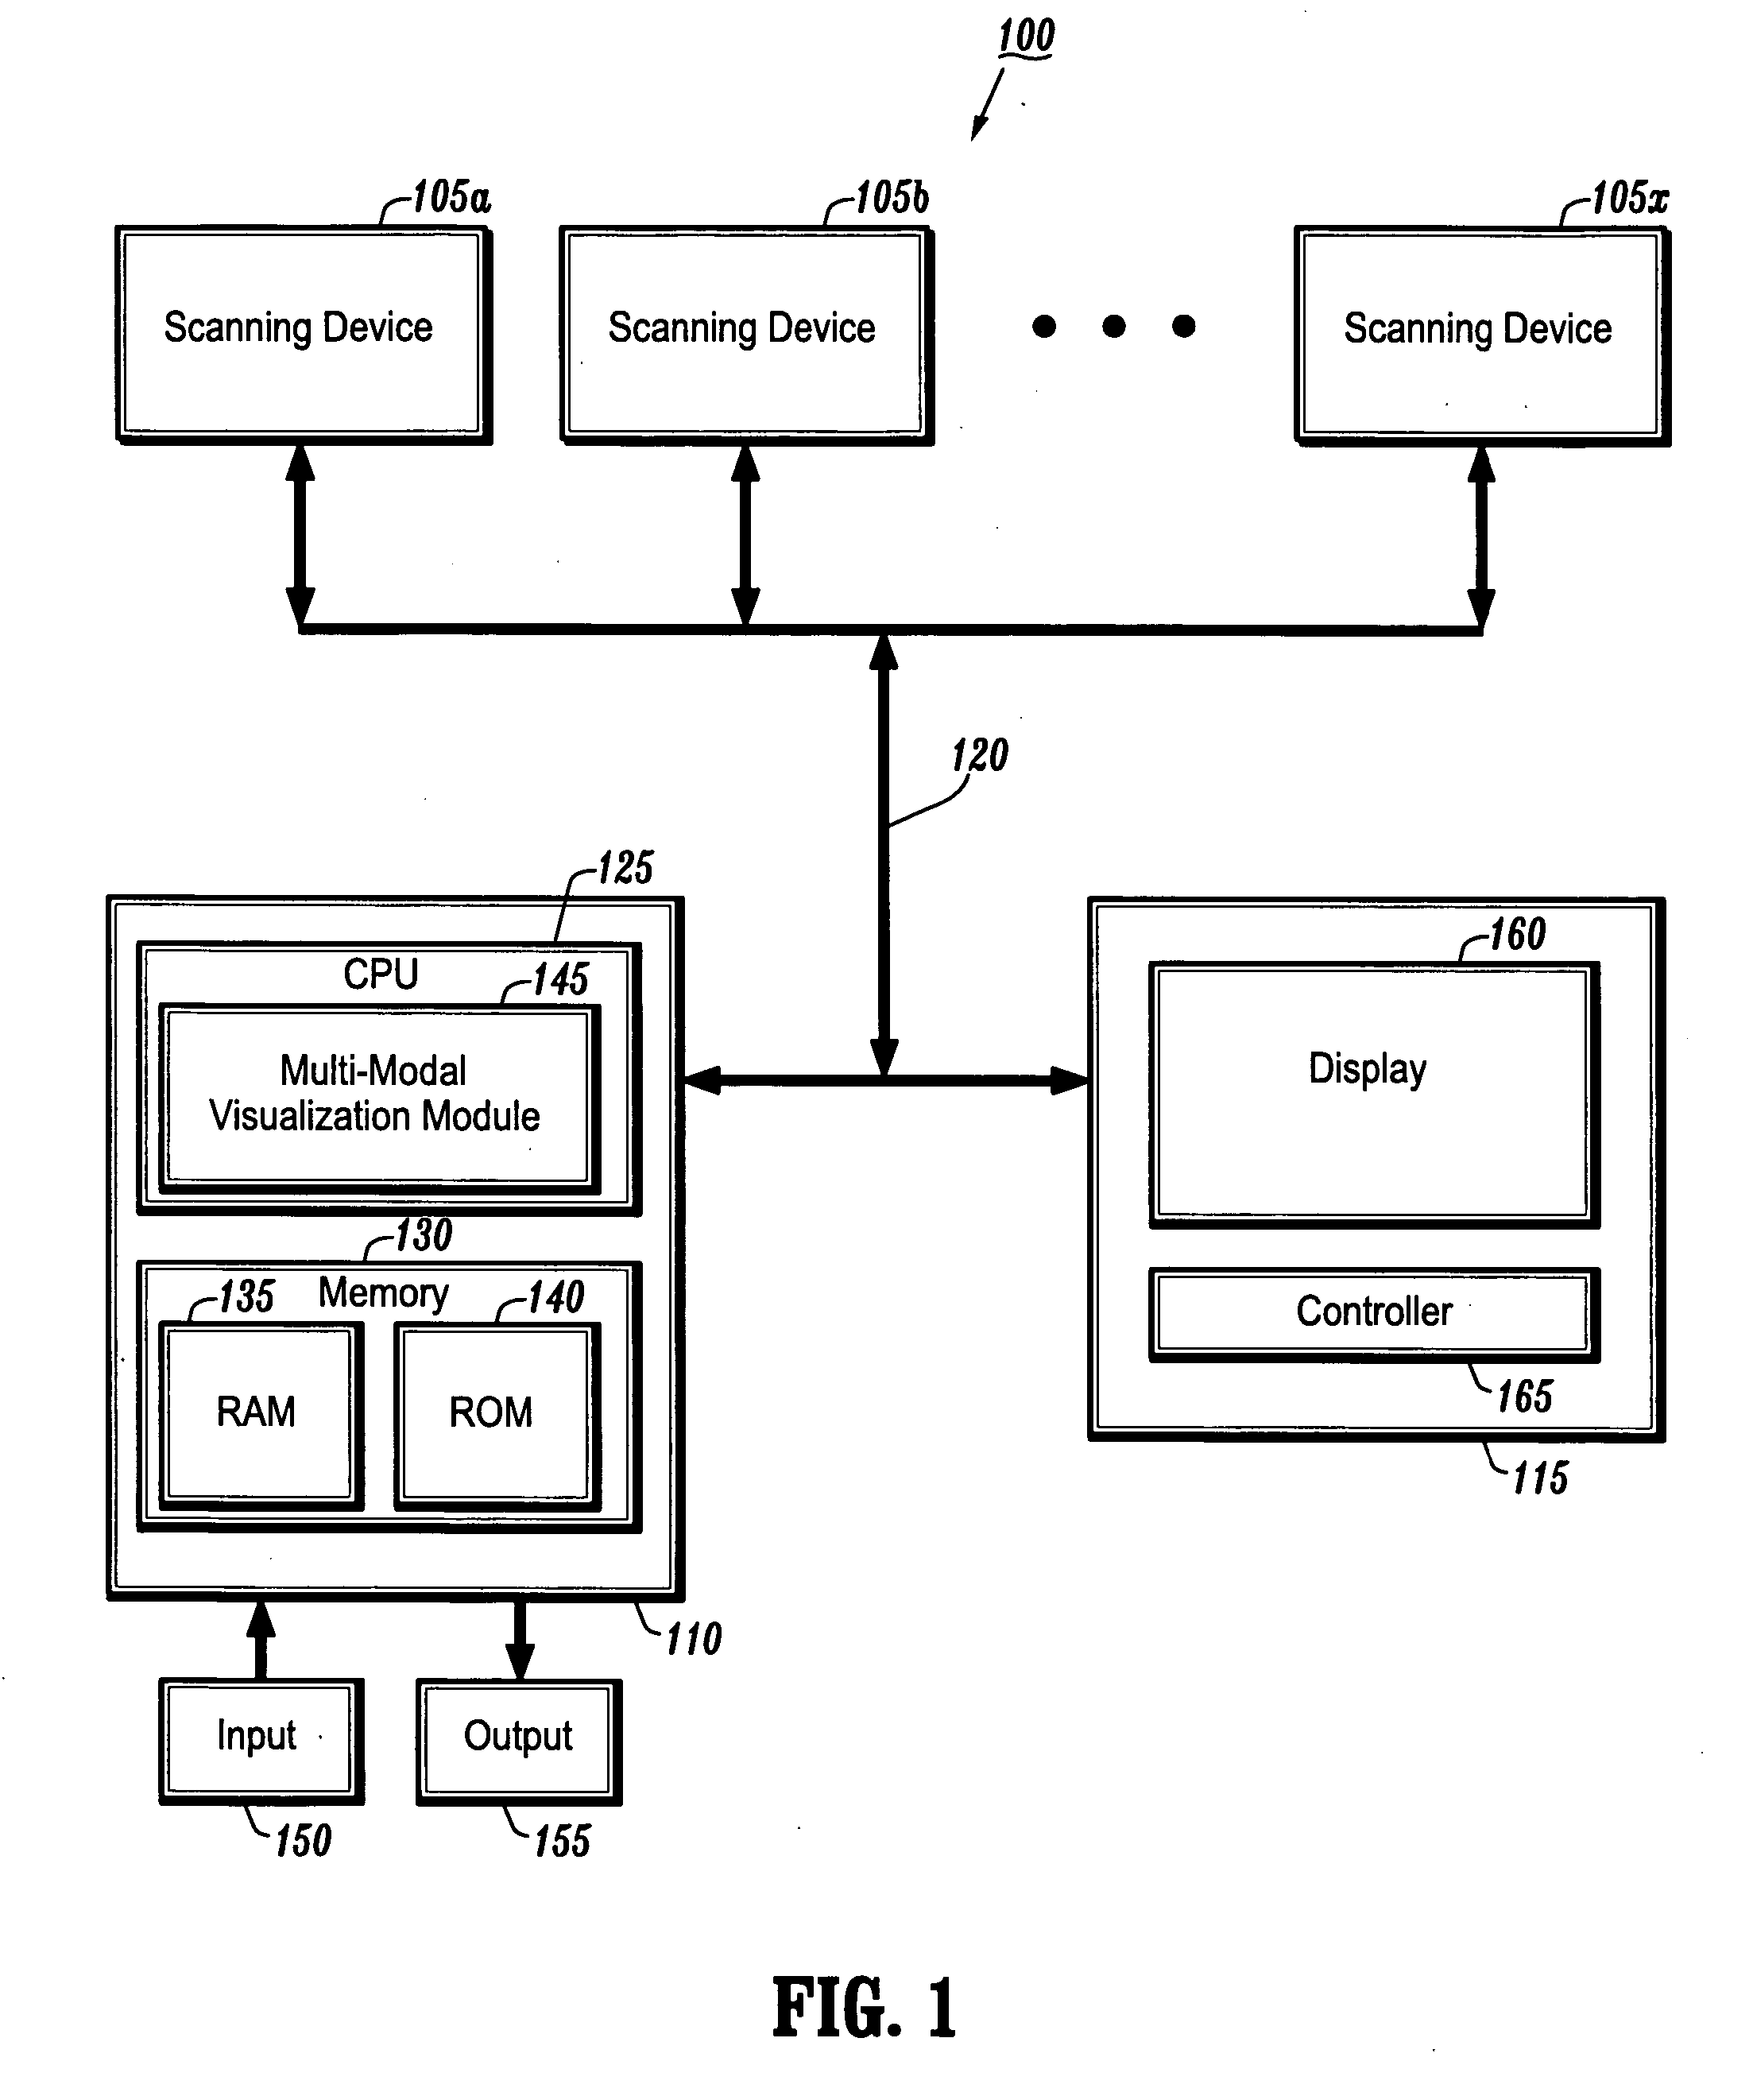 System and method for monitoring disease progression or response to therapy using multi-modal visualization